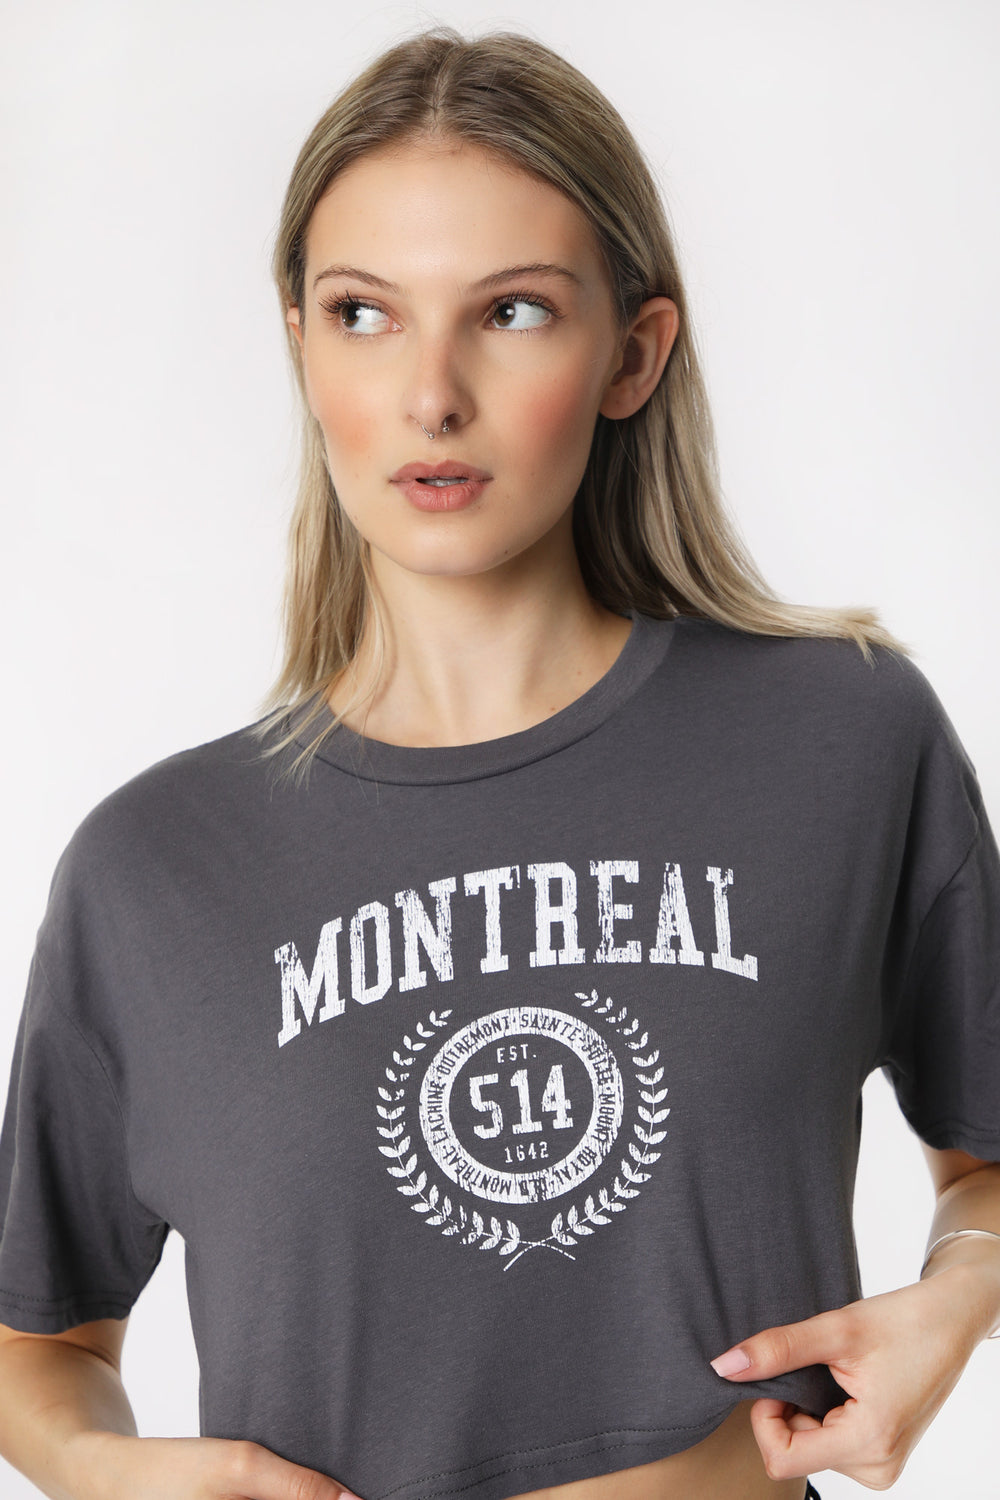 Womens Montreal Cropped Tee Womens Montreal Cropped Tee